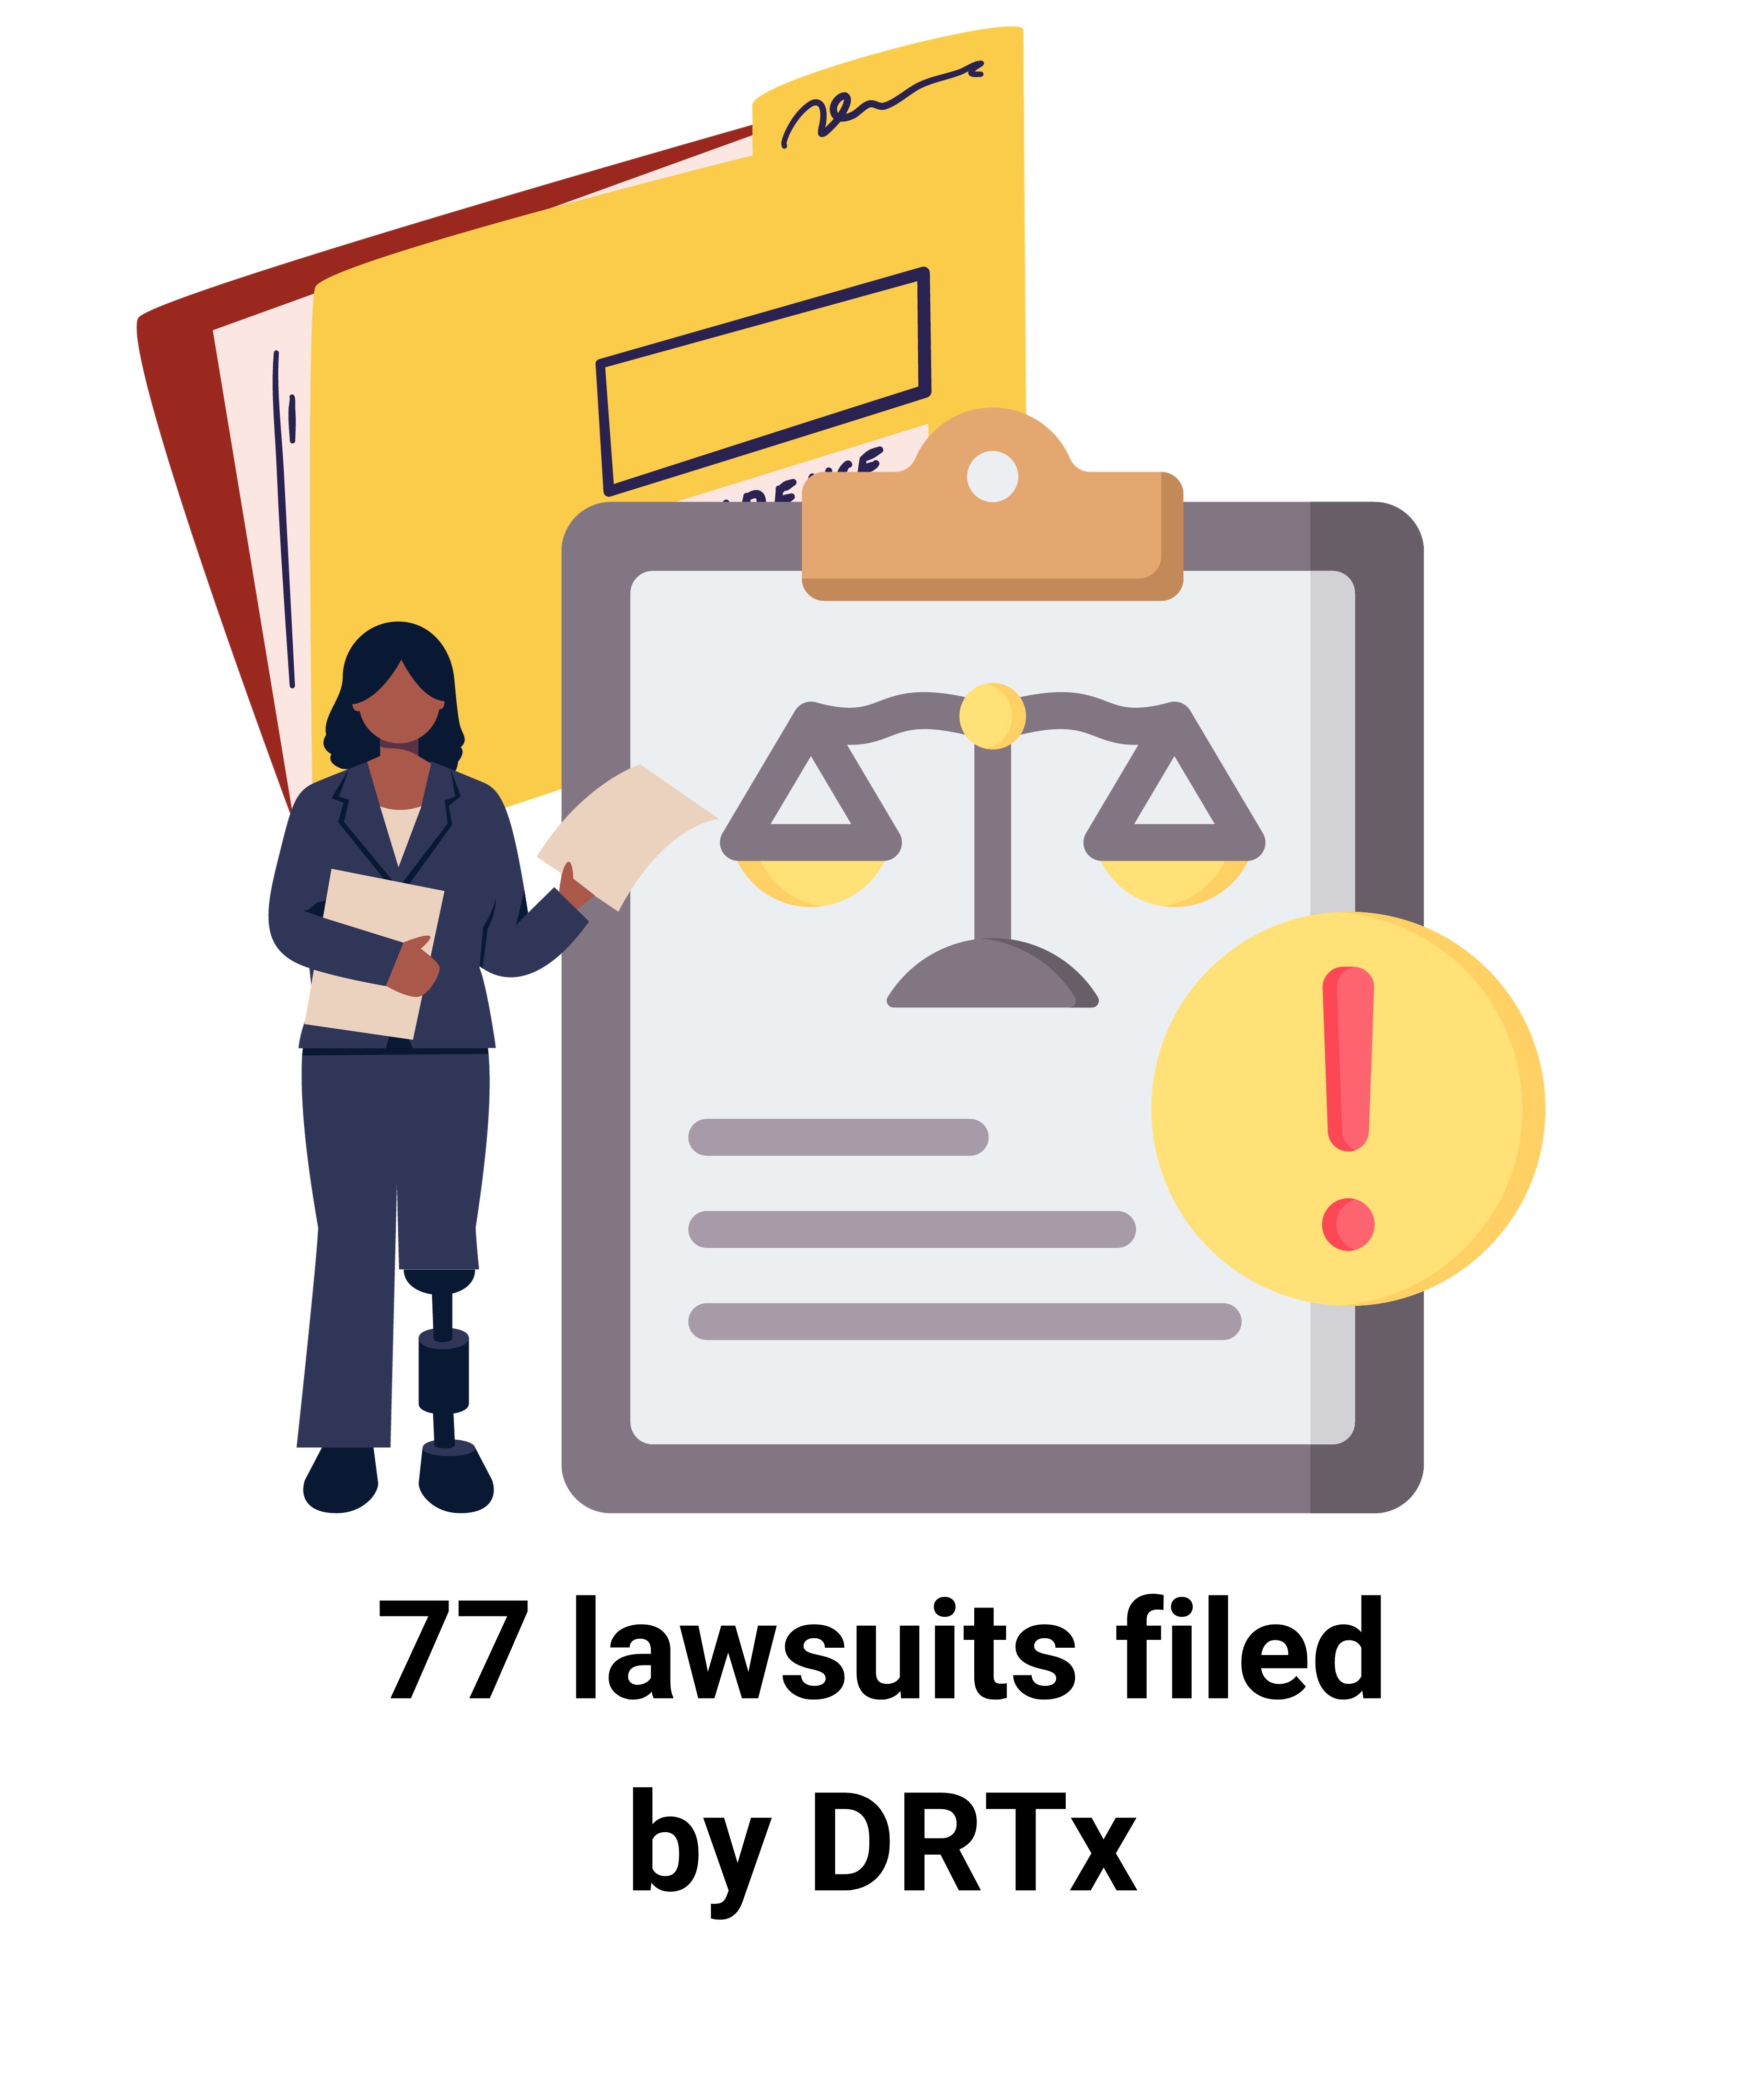 A person with a prosthetic leg wearing a suit and holding a file folder. 77 lawsuits filed by DRTx.